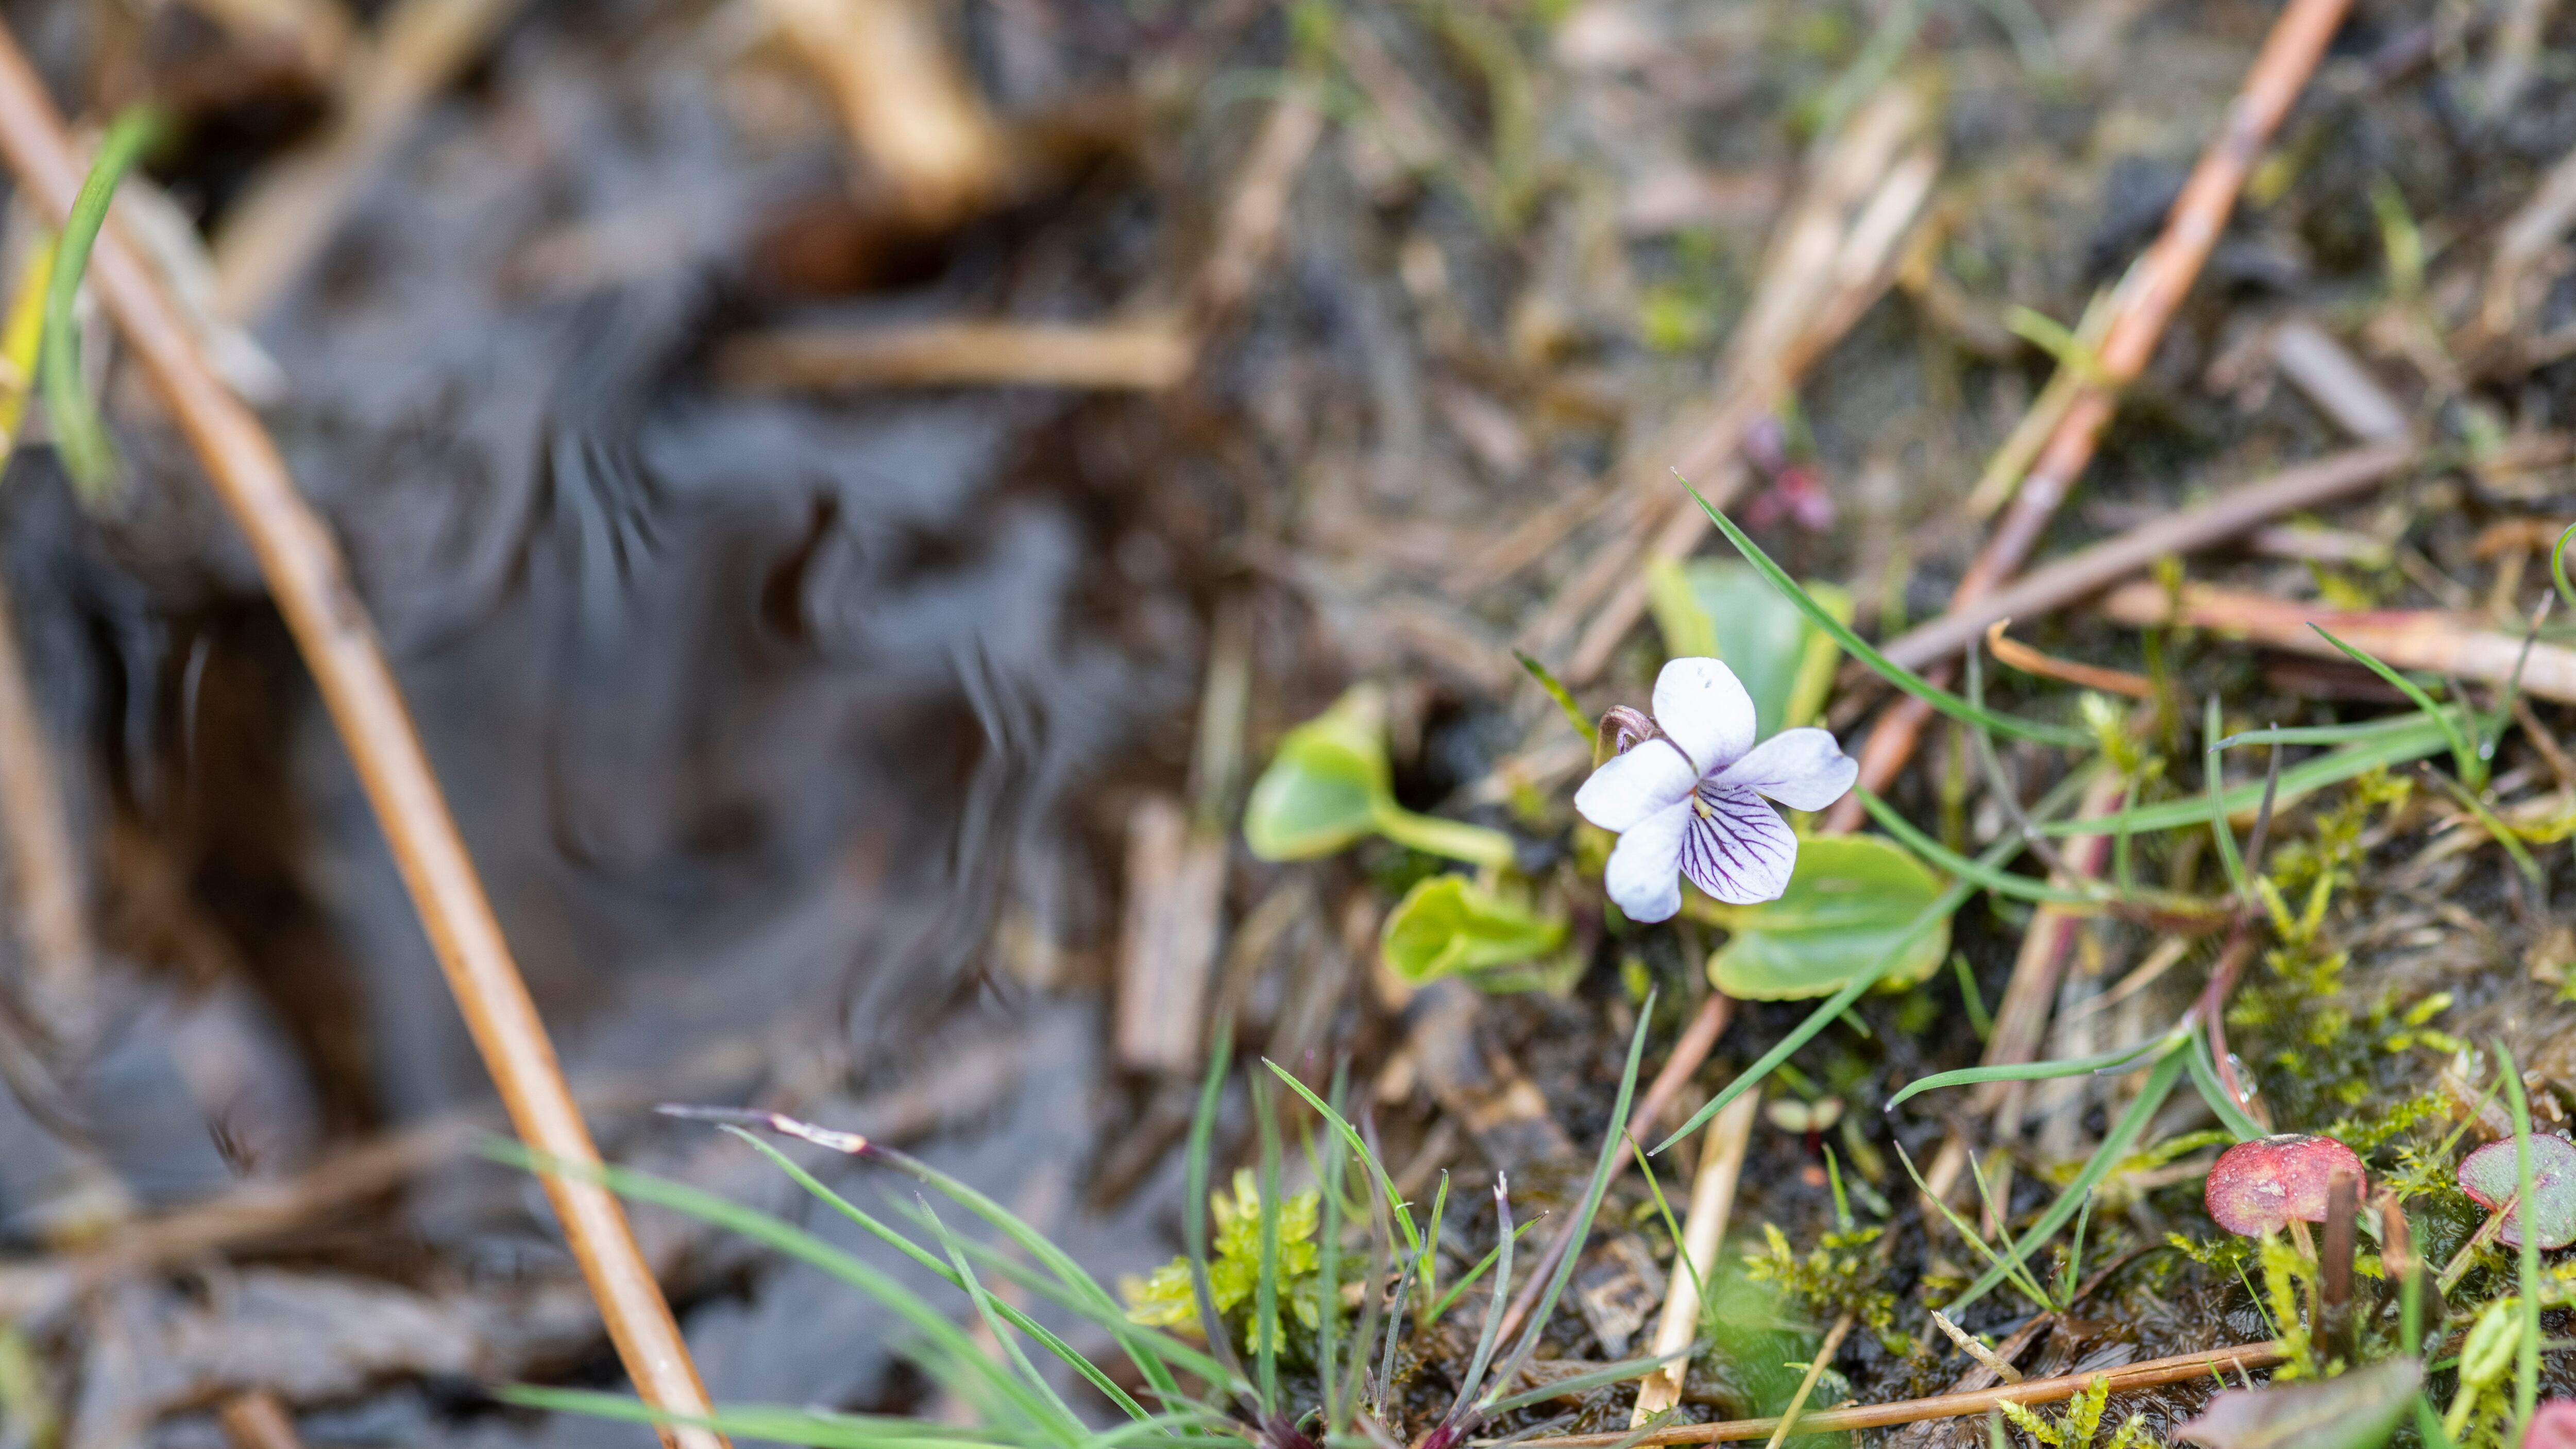 Marsh violets are being planted as part of a species regeneration project